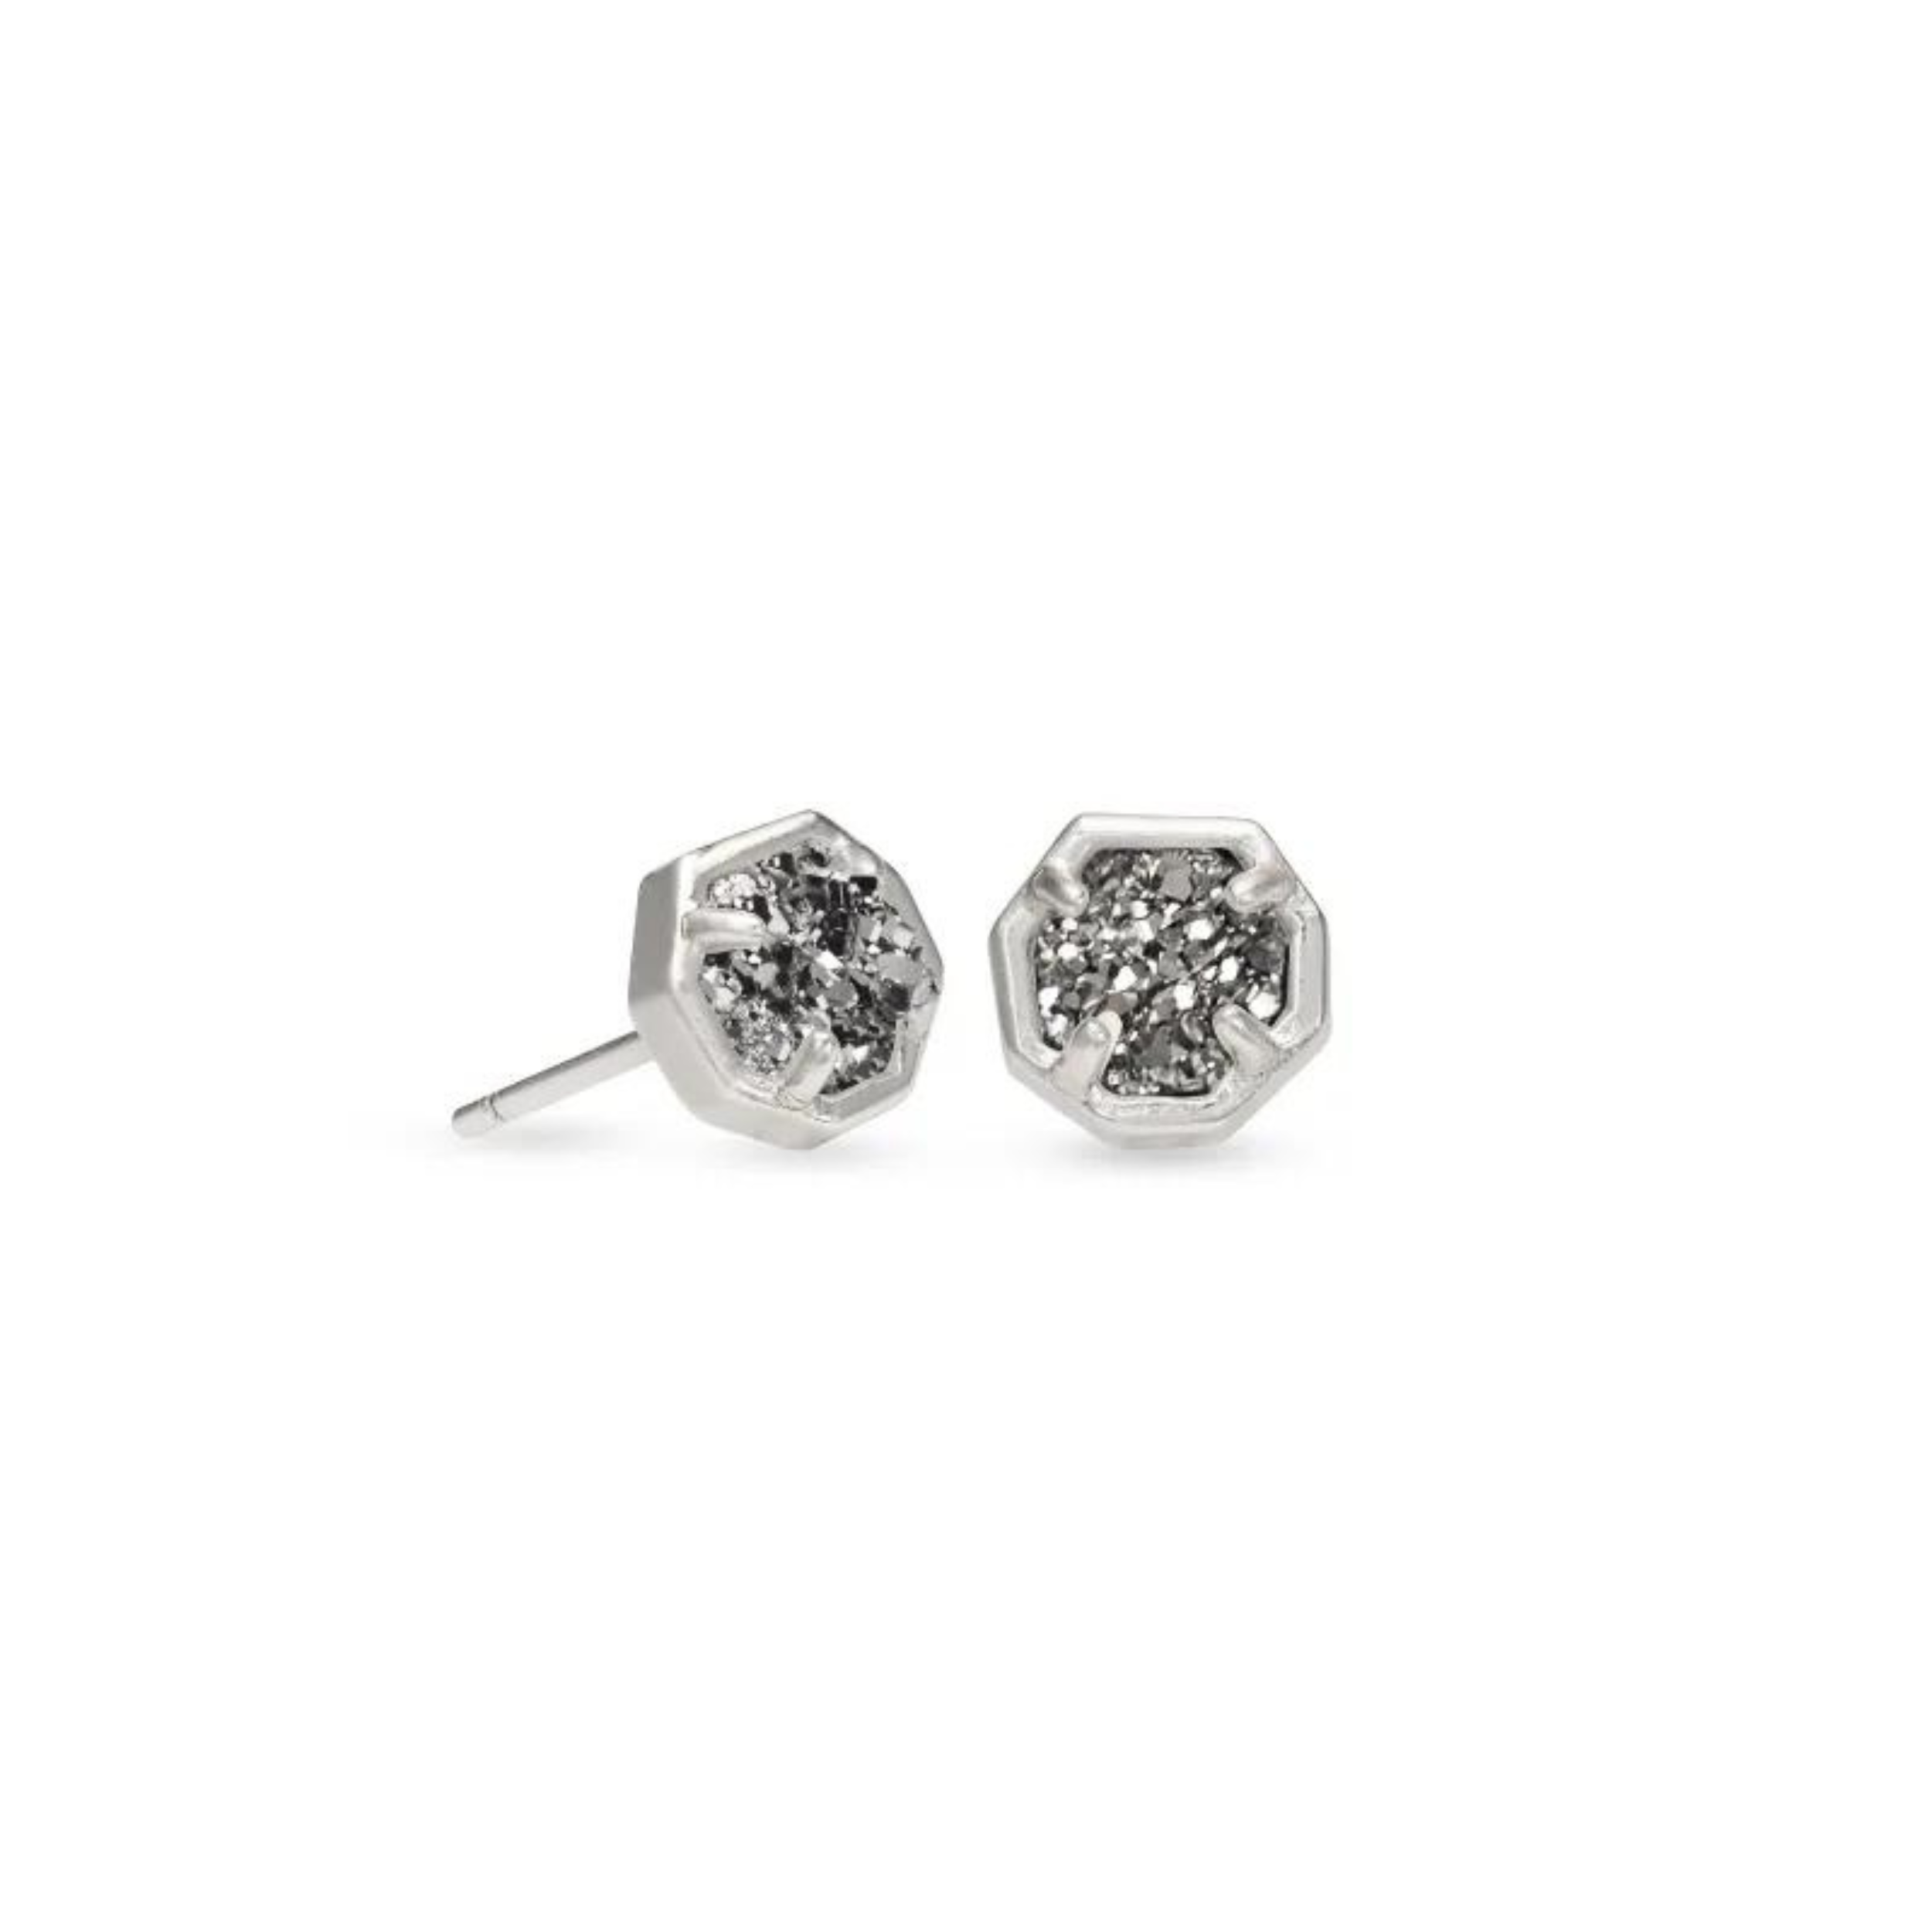 Silver stud earrings in a hexagon shape with platnium drusy stones, pictured on a white background.